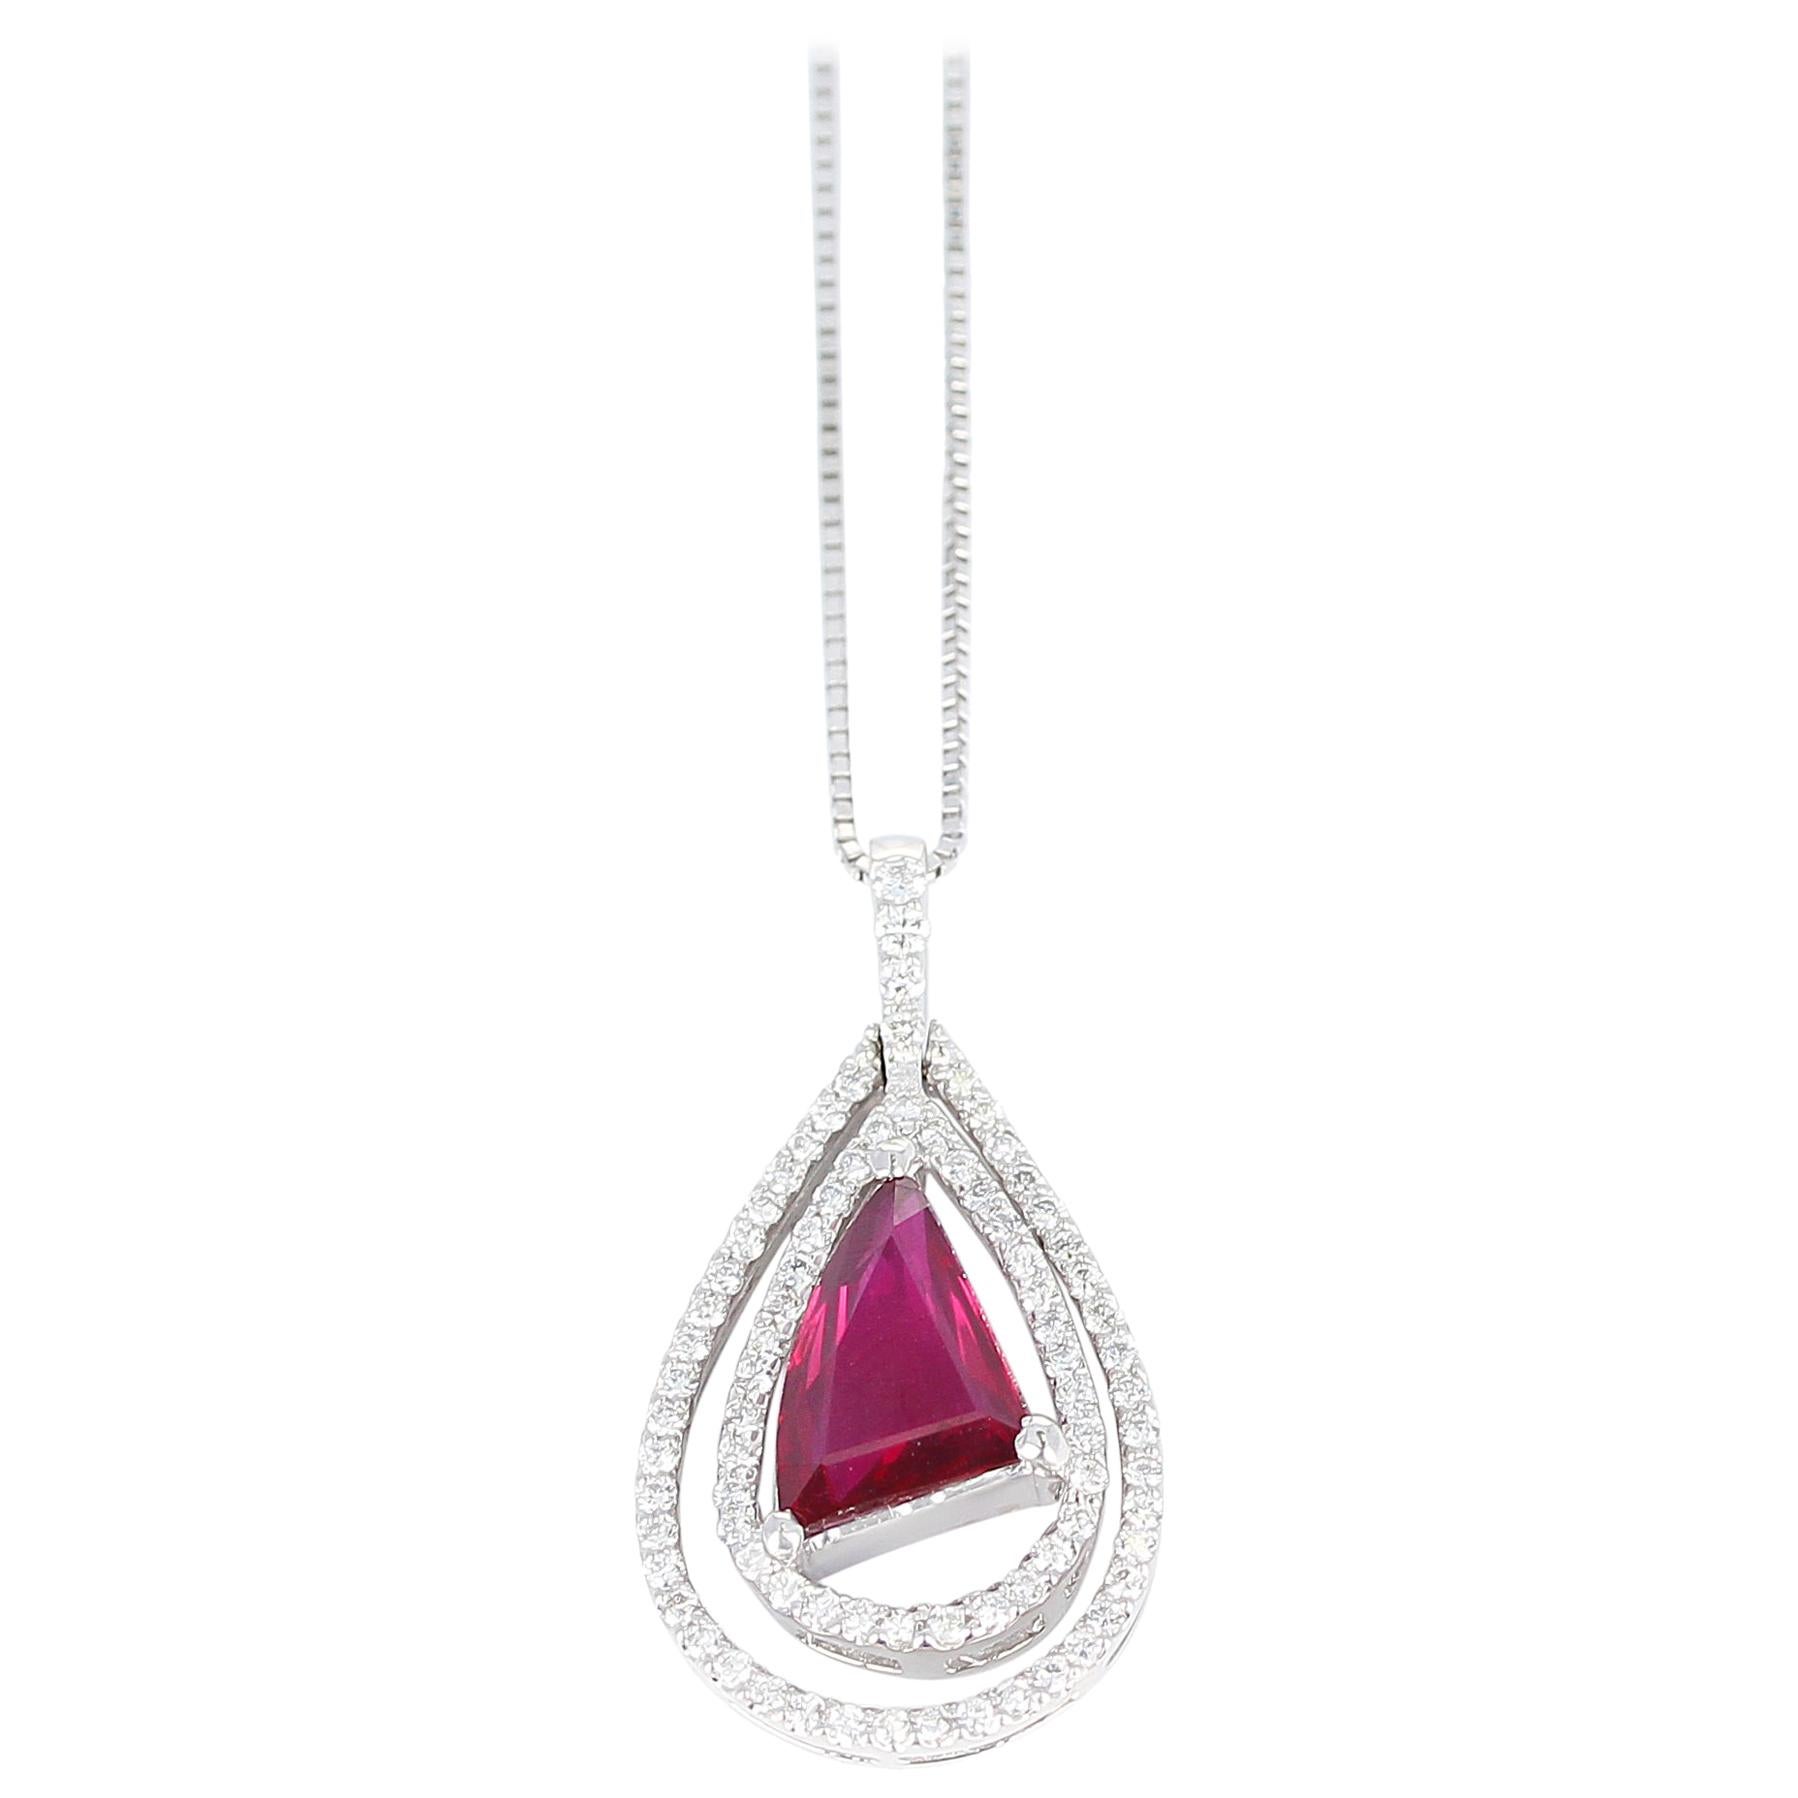 GRS Certified 2.03 Carat No Heat Vivid Red Mozambique Ruby and Diamond Pendant